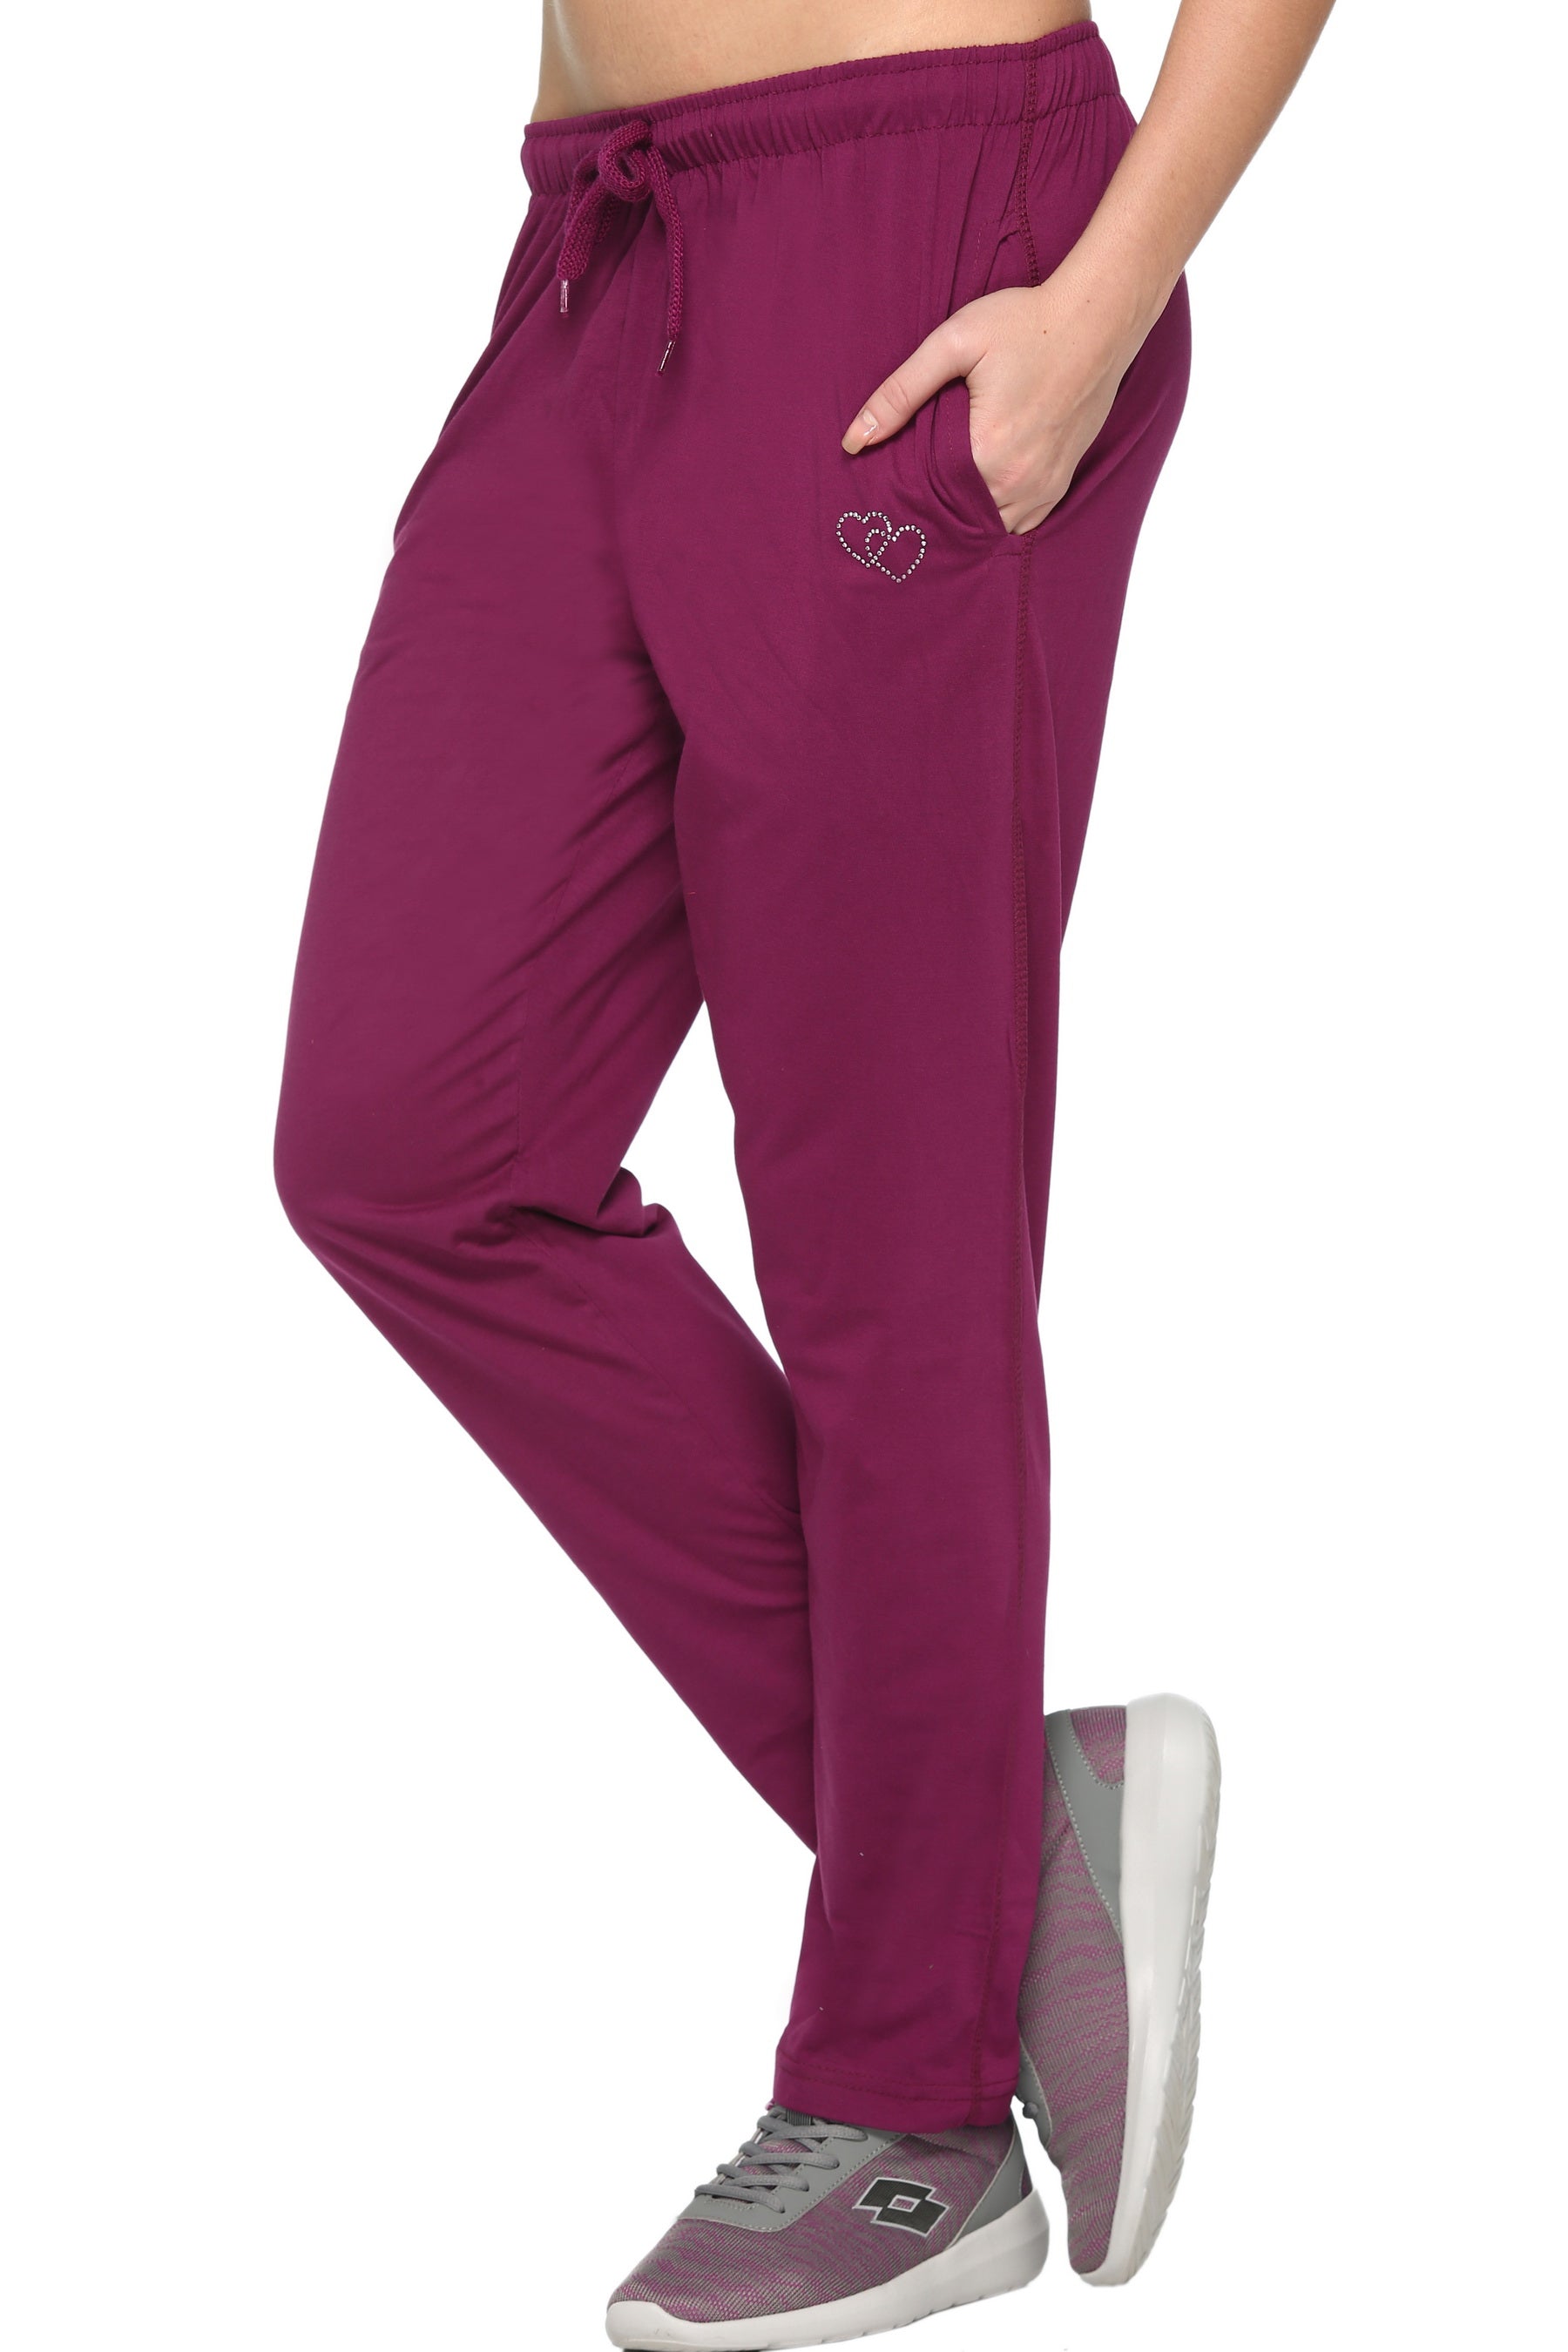 Womens Purple Pants | Forever 21